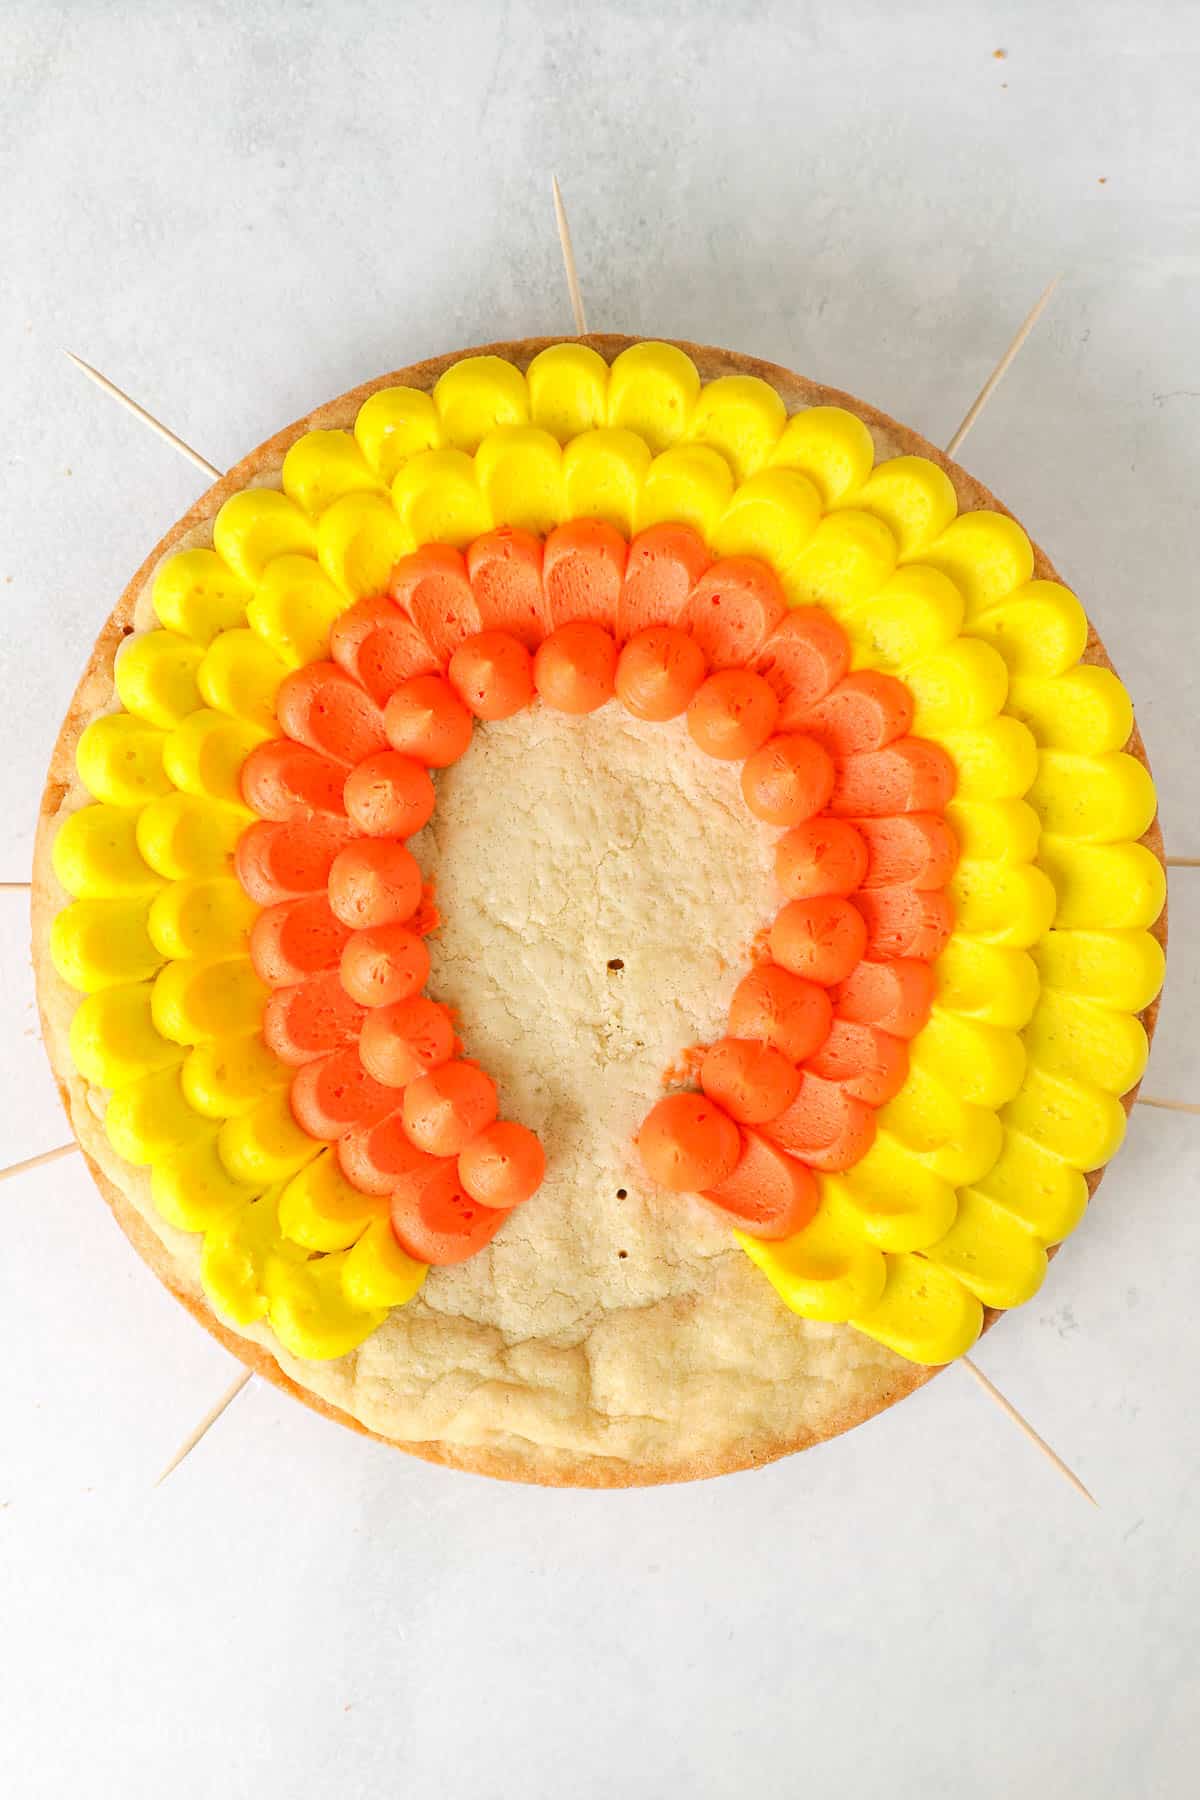 Overhead view of a cookie cake with a rows of yellow and orange frosting to make turkey feathers